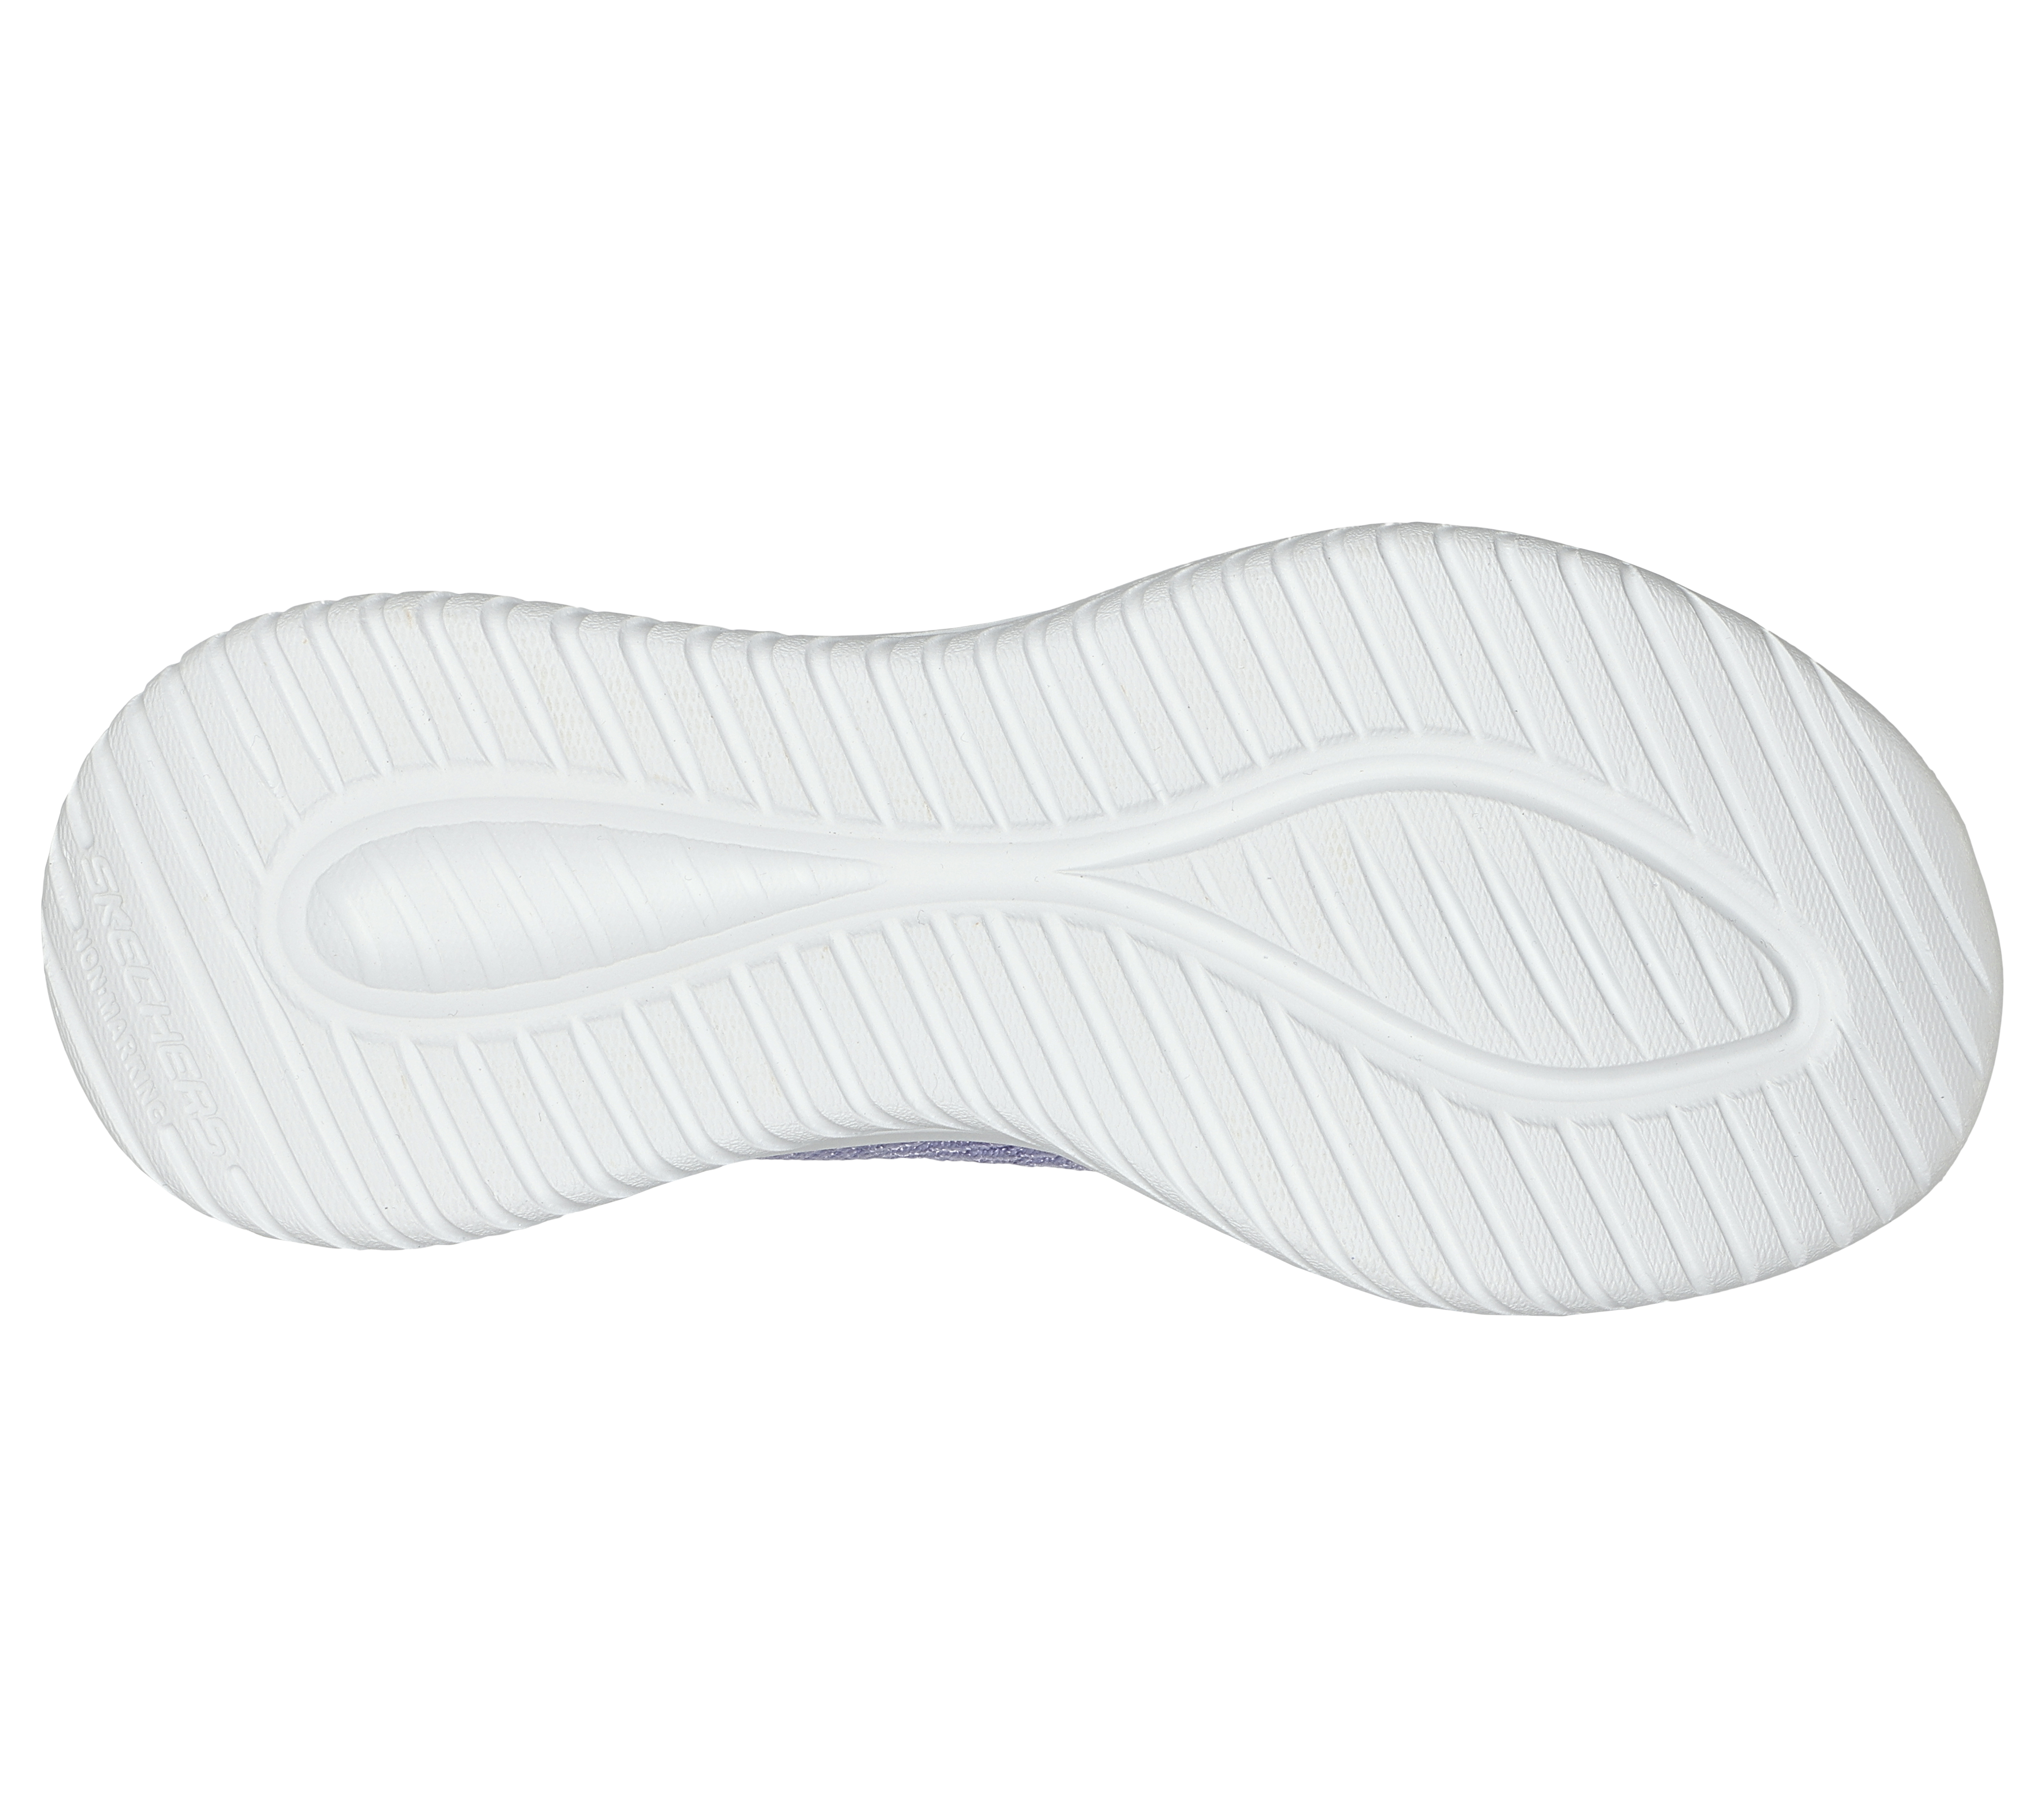 Skechers Slip-ons - Ultra Flex 3.0 - Col - 303801L-LTPK - Online shop for  sneakers, shoes and boots